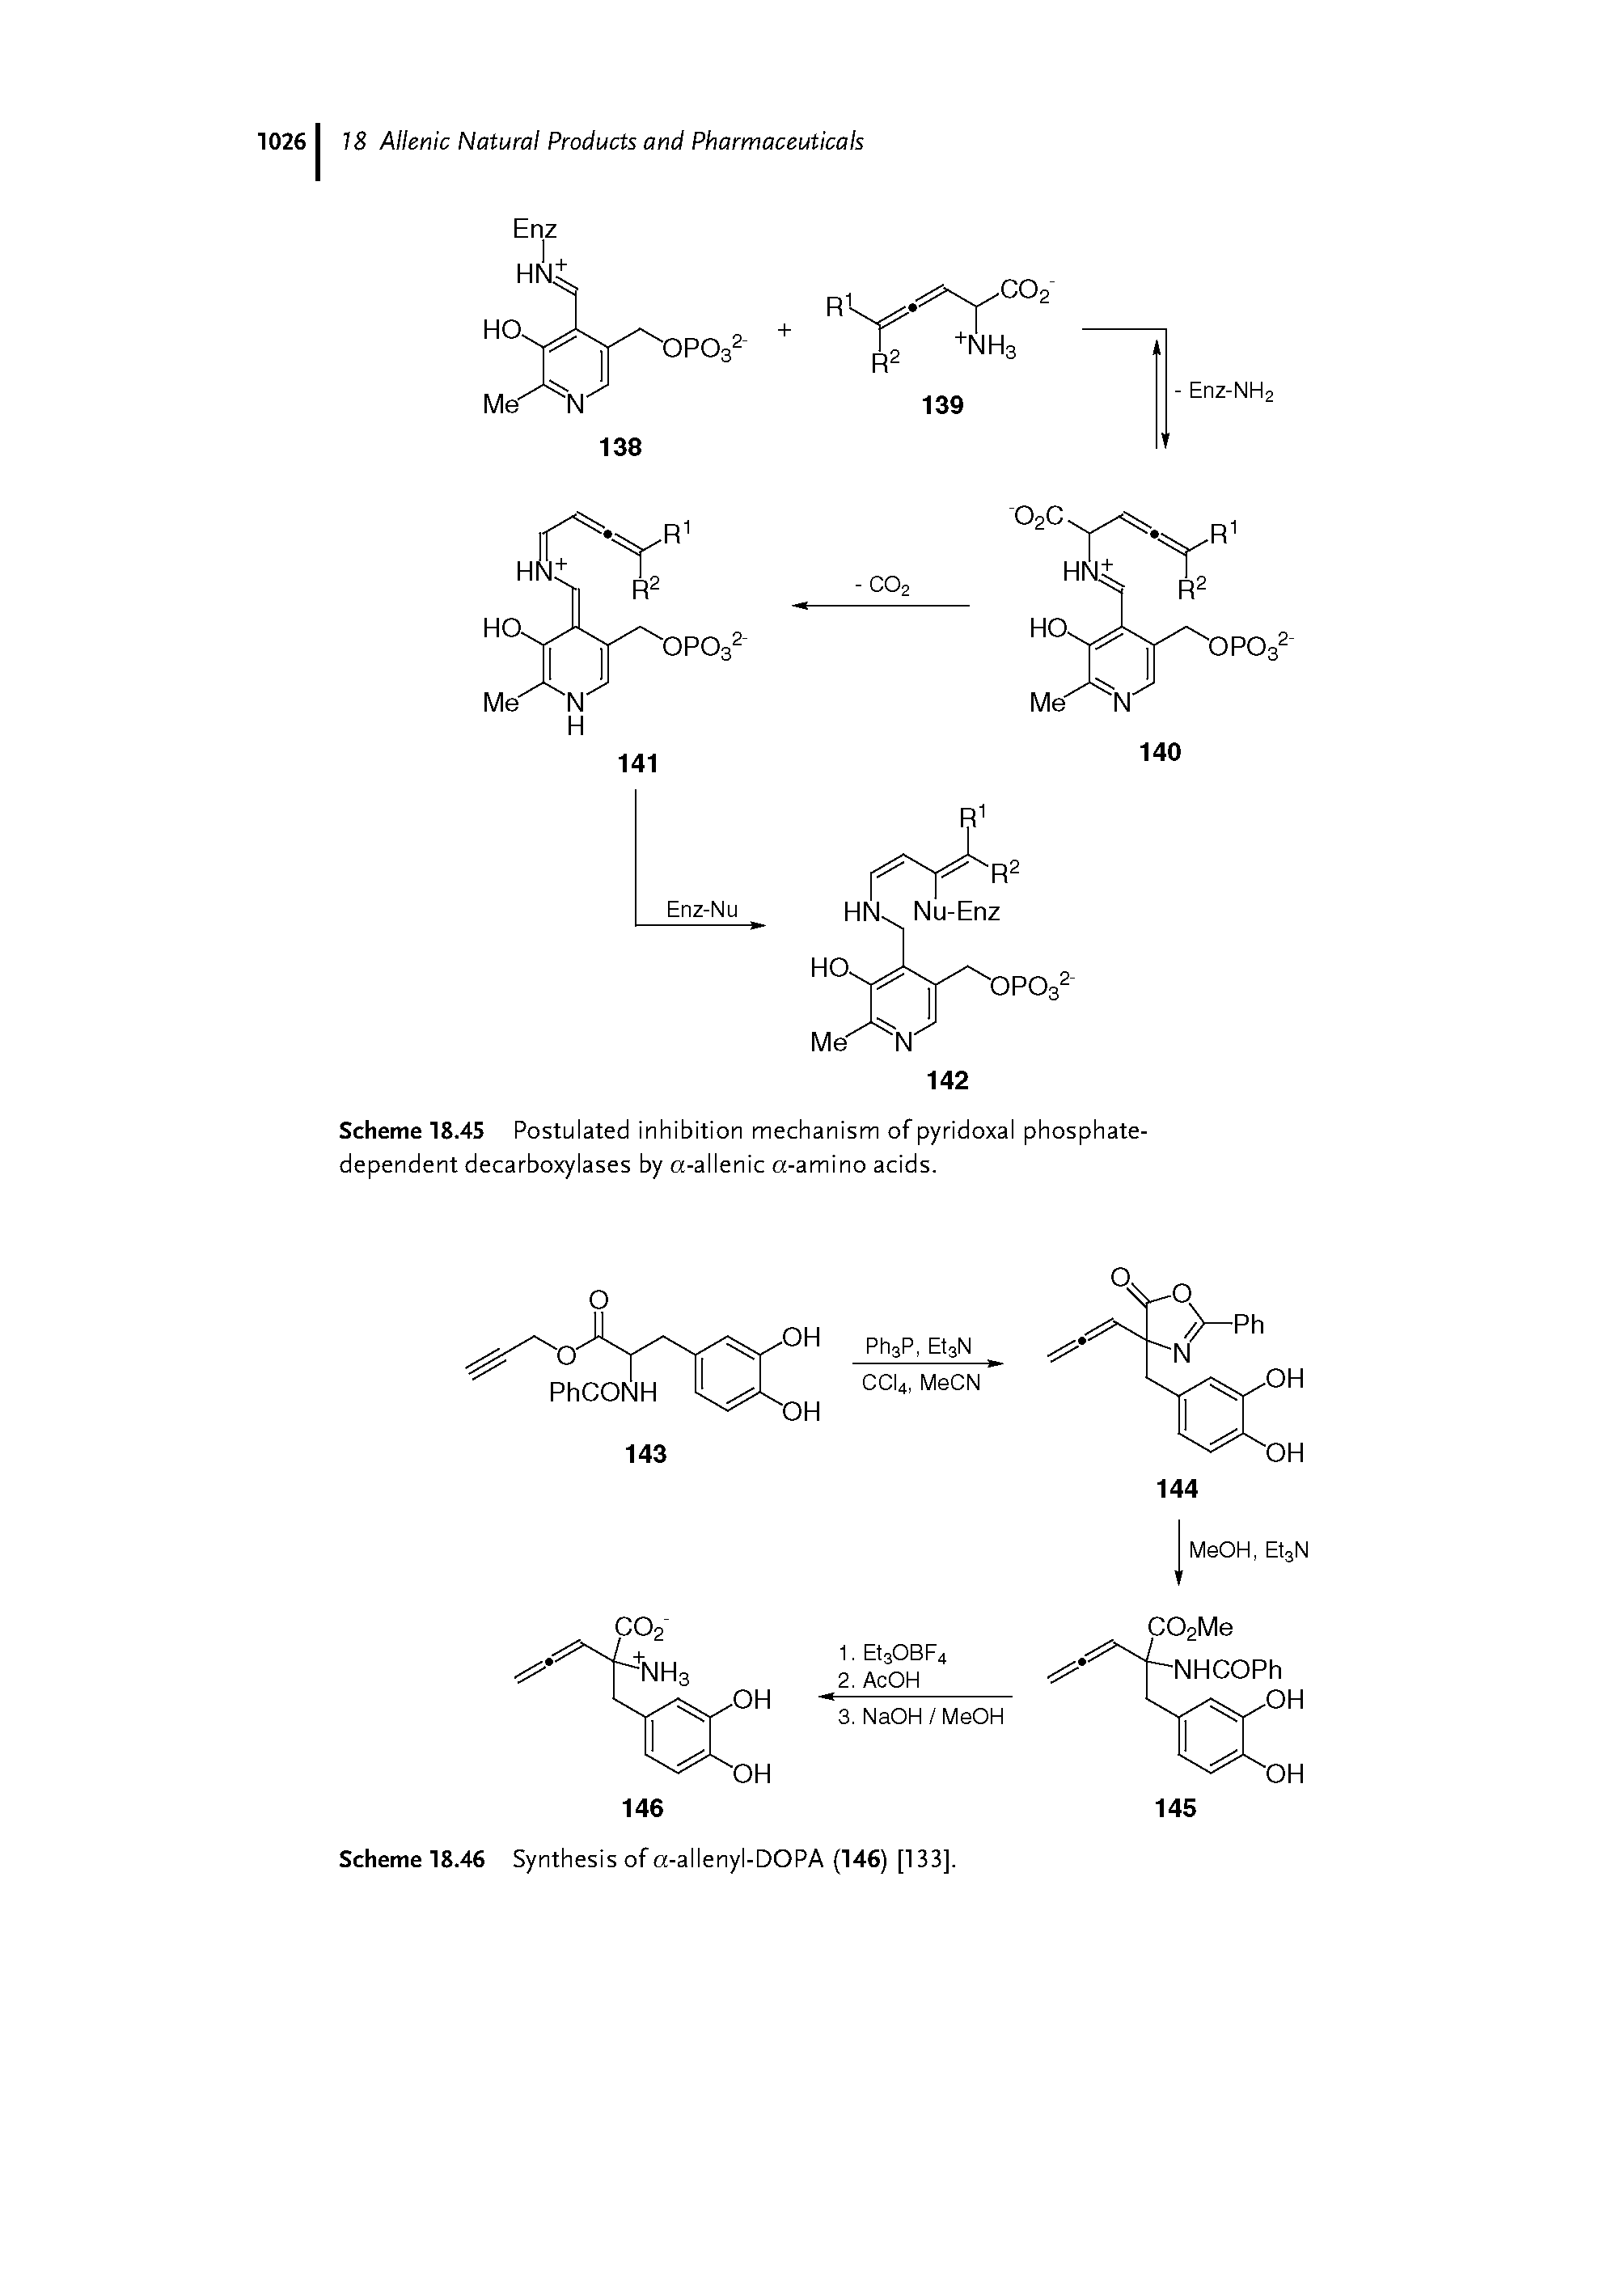 Scheme 18.45 Postulated inhibition mechanism of pyridoxal phosphate-dependent decarboxylases by a-allenic a-amino acids.